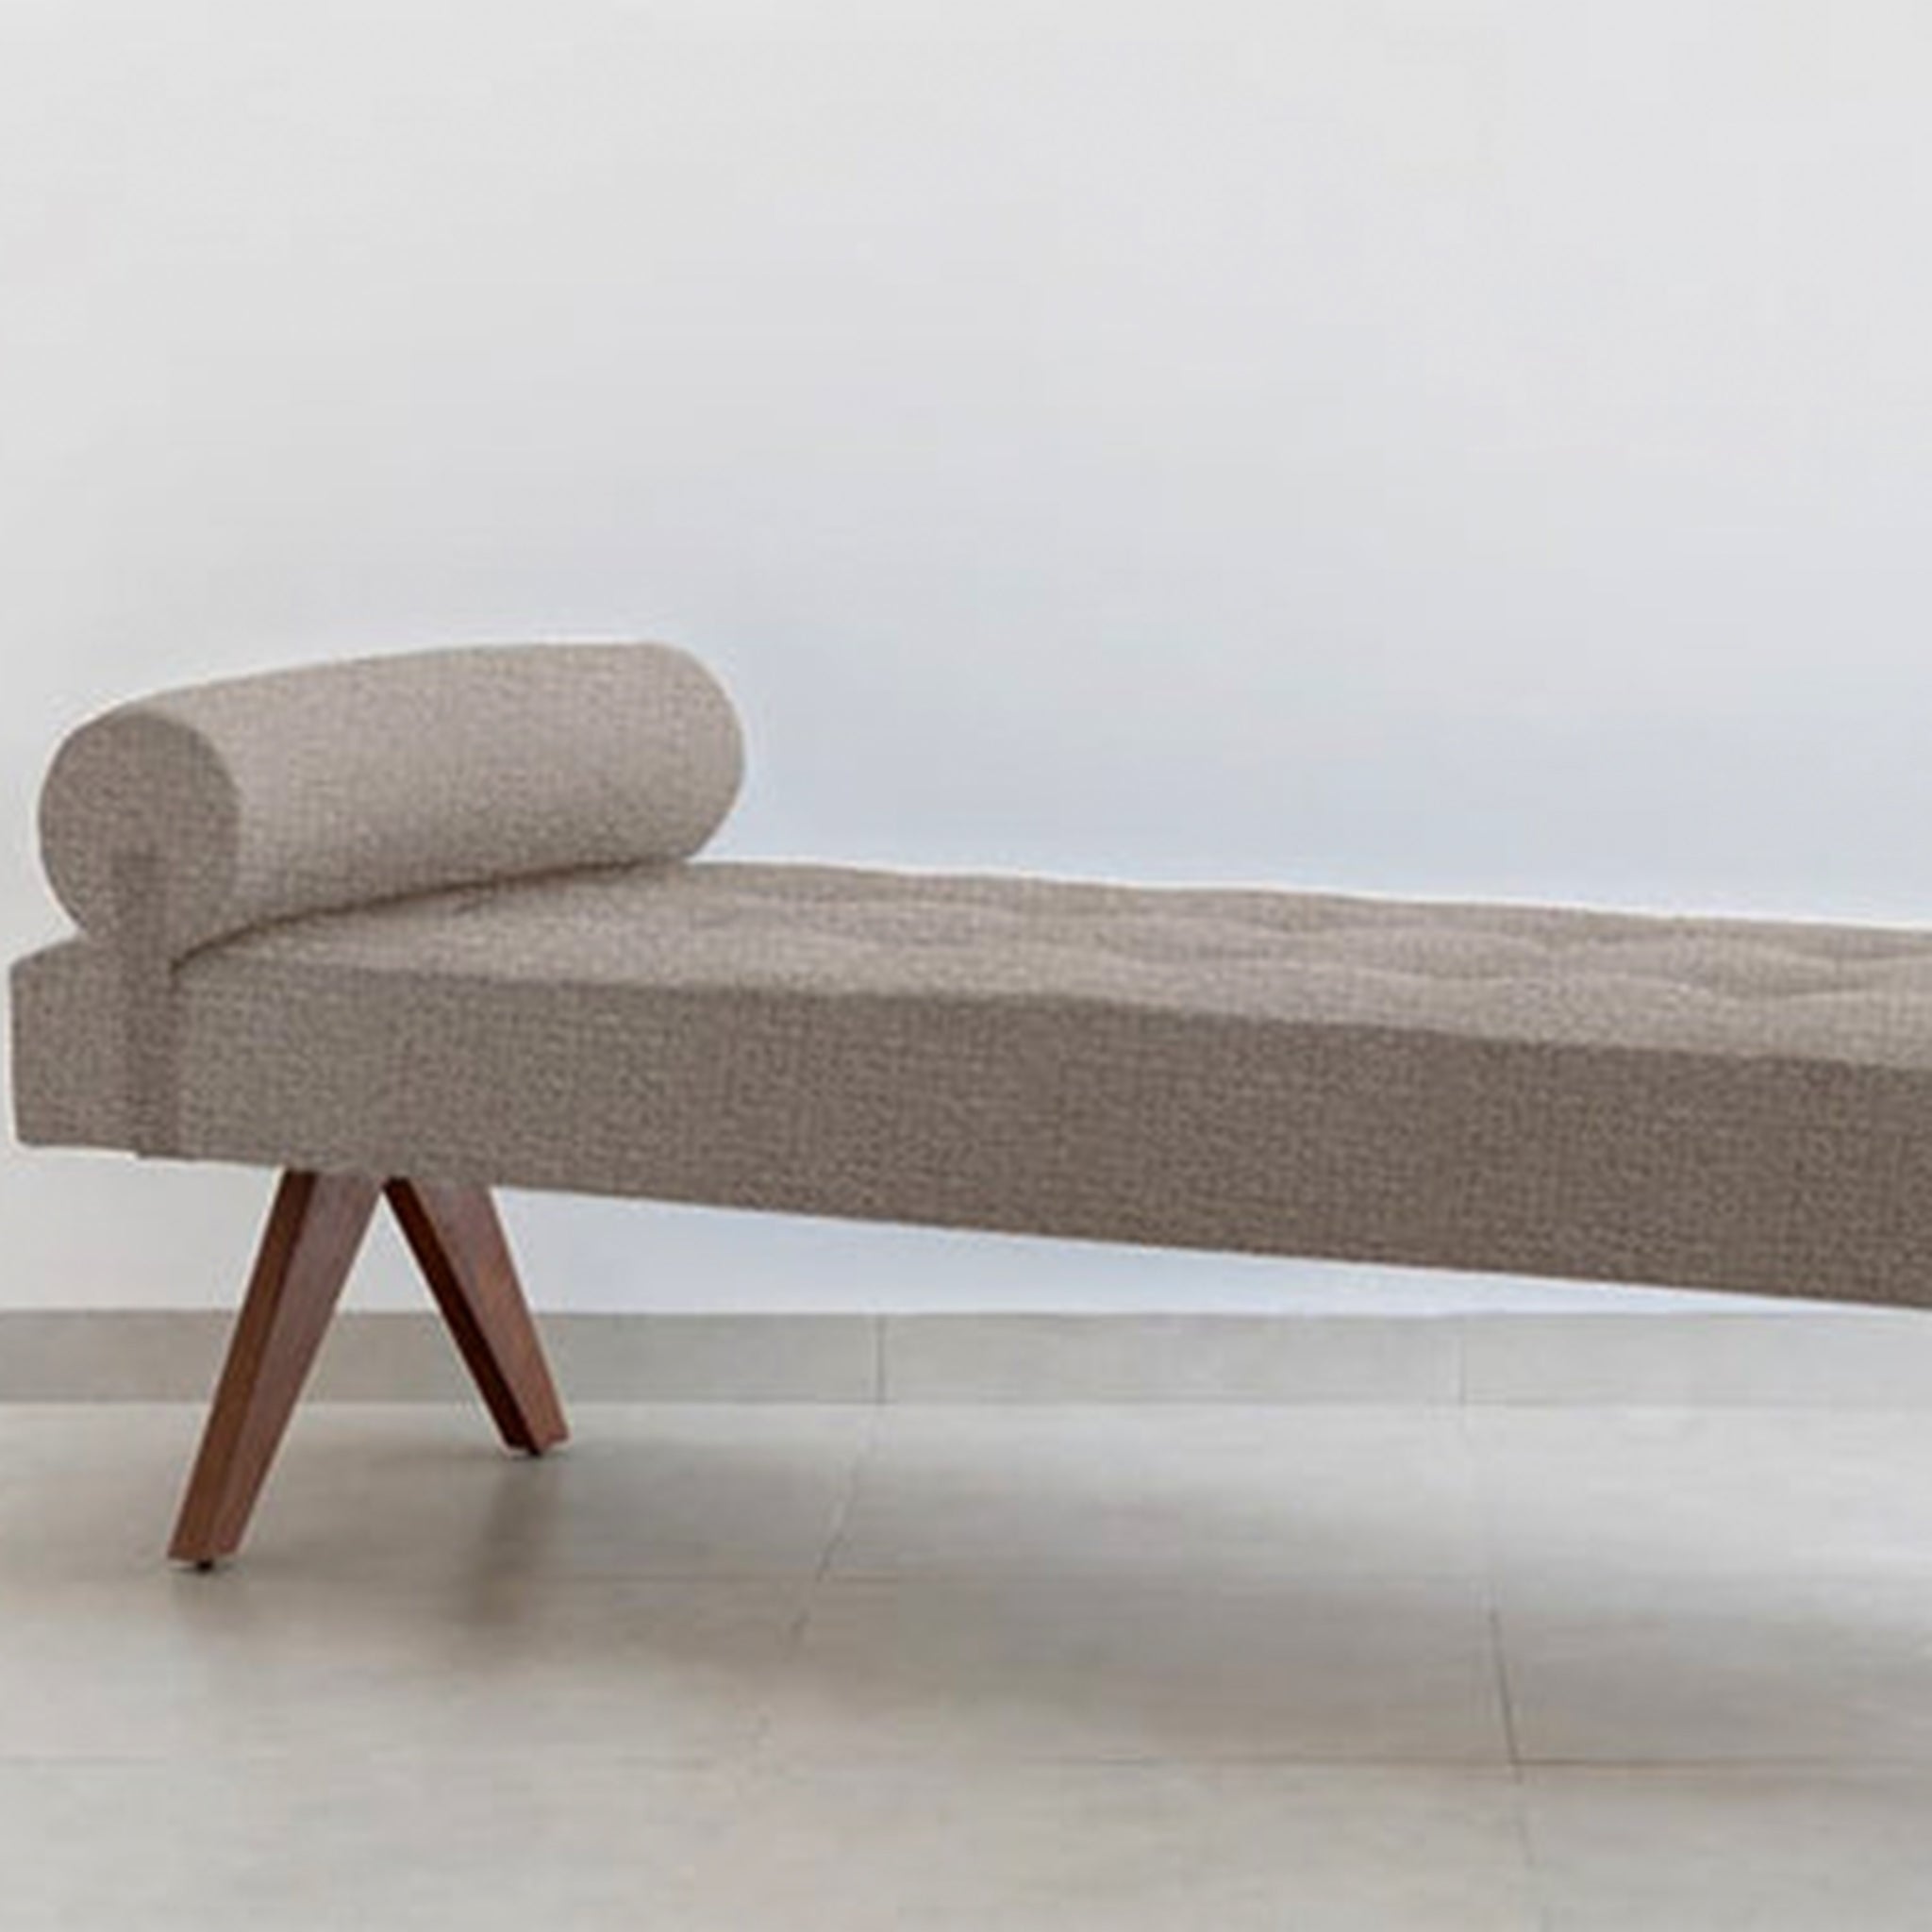 The Jack Daybed with a sleek bolster